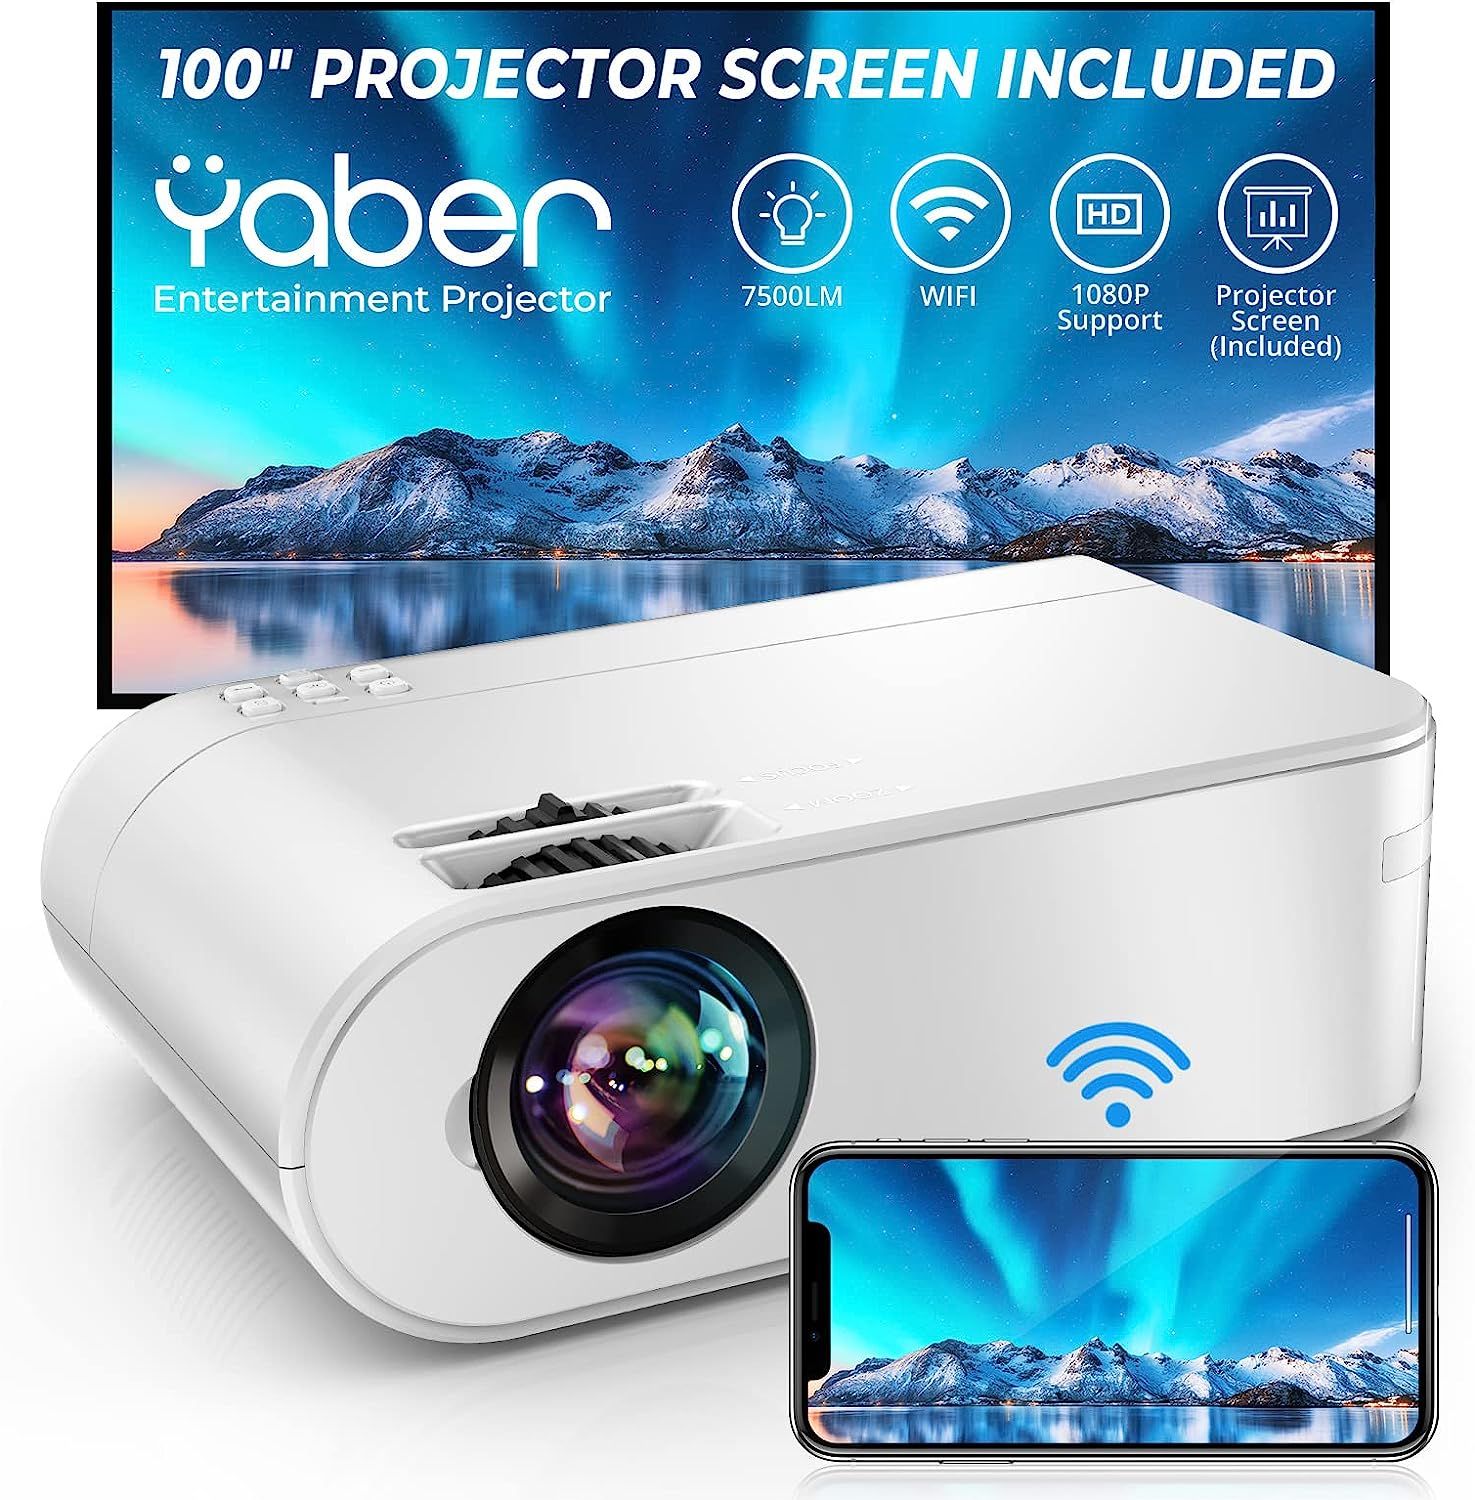 YABER V2 WiFi Mini 7500L Projector [Projector Screen Included] 1080P Full HD and 300" Supported, ... | Amazon (US)